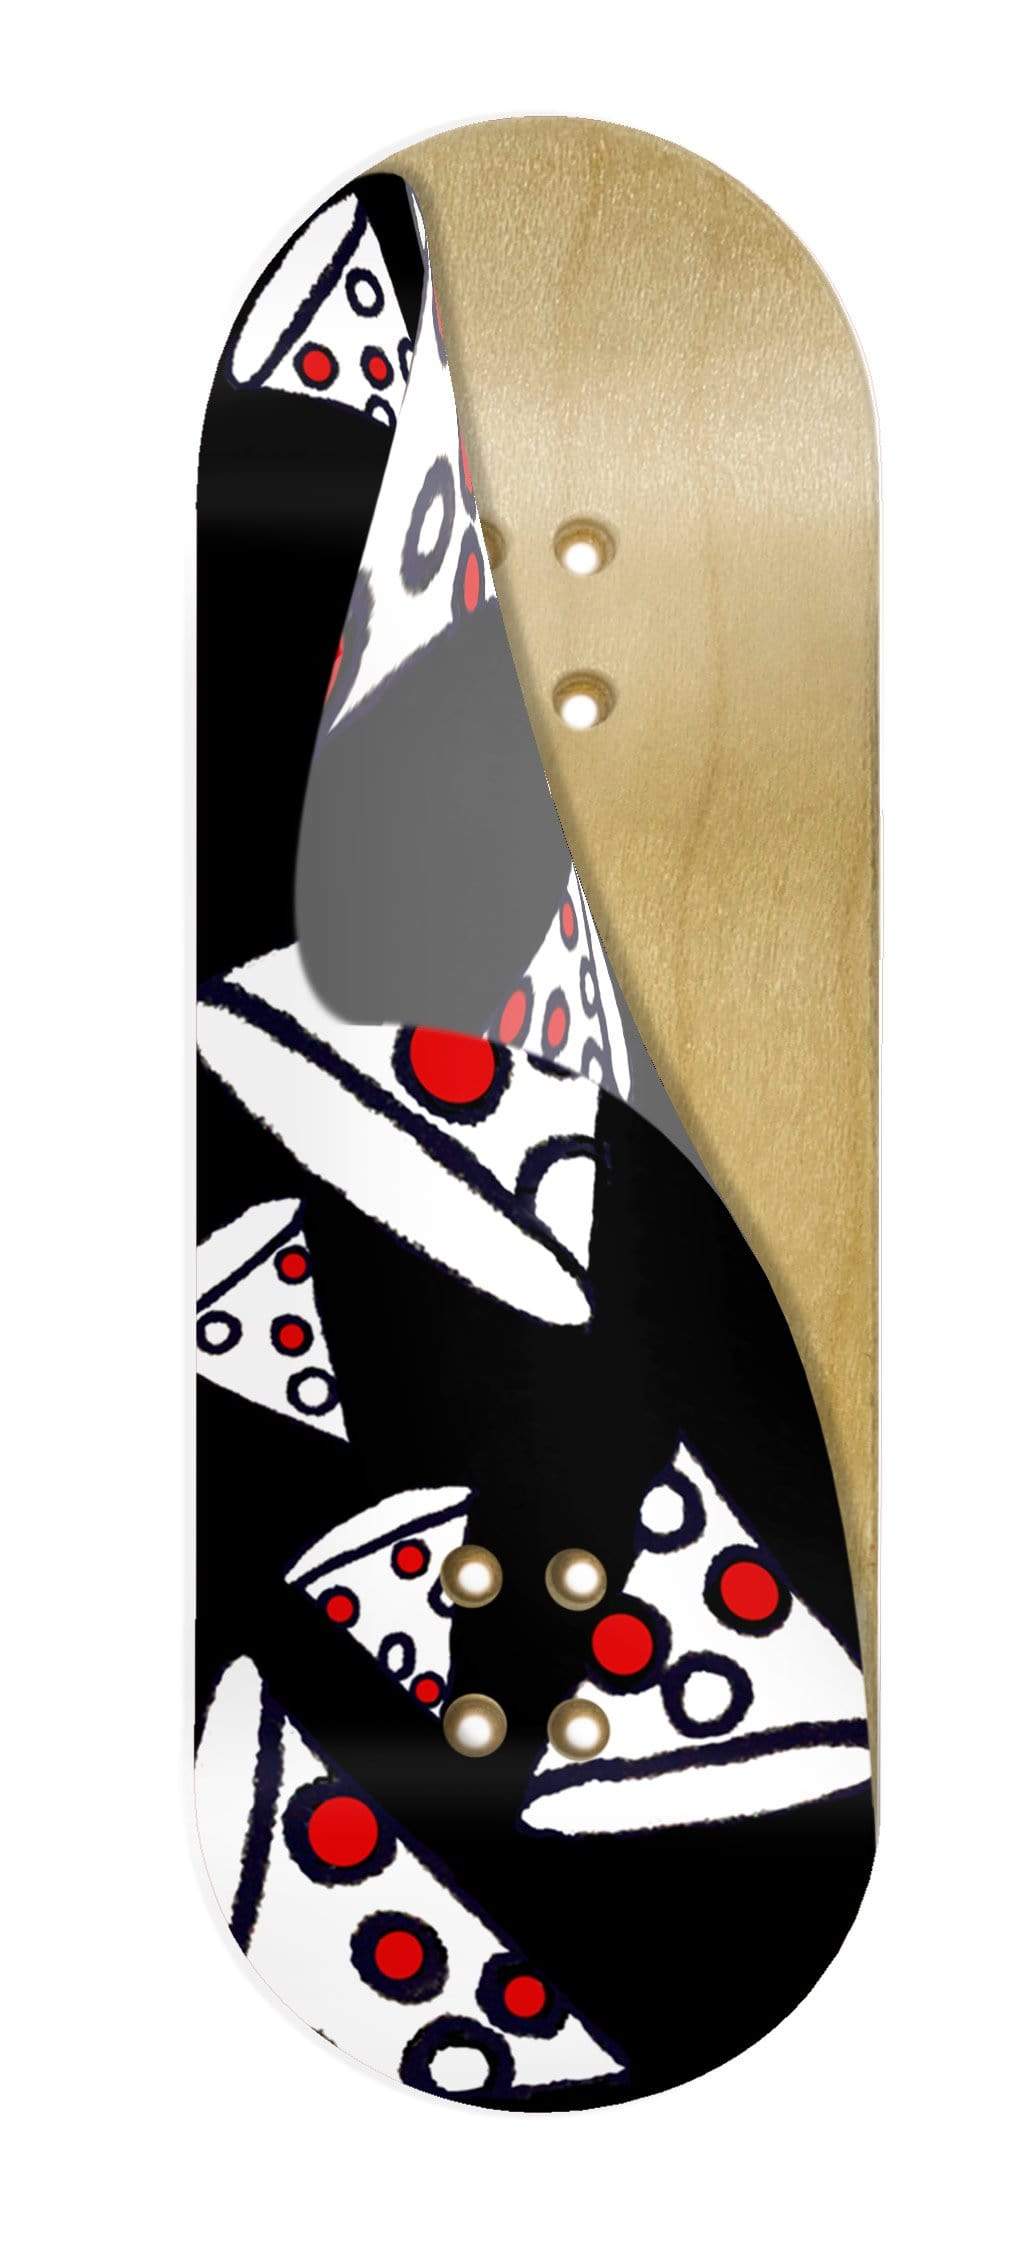 Teak Tuning "Pizza Frenzy" WellVentions Collaboration Deck Graphic Wrap - Designed by Isabela (age 14) - 35mm x 110mm